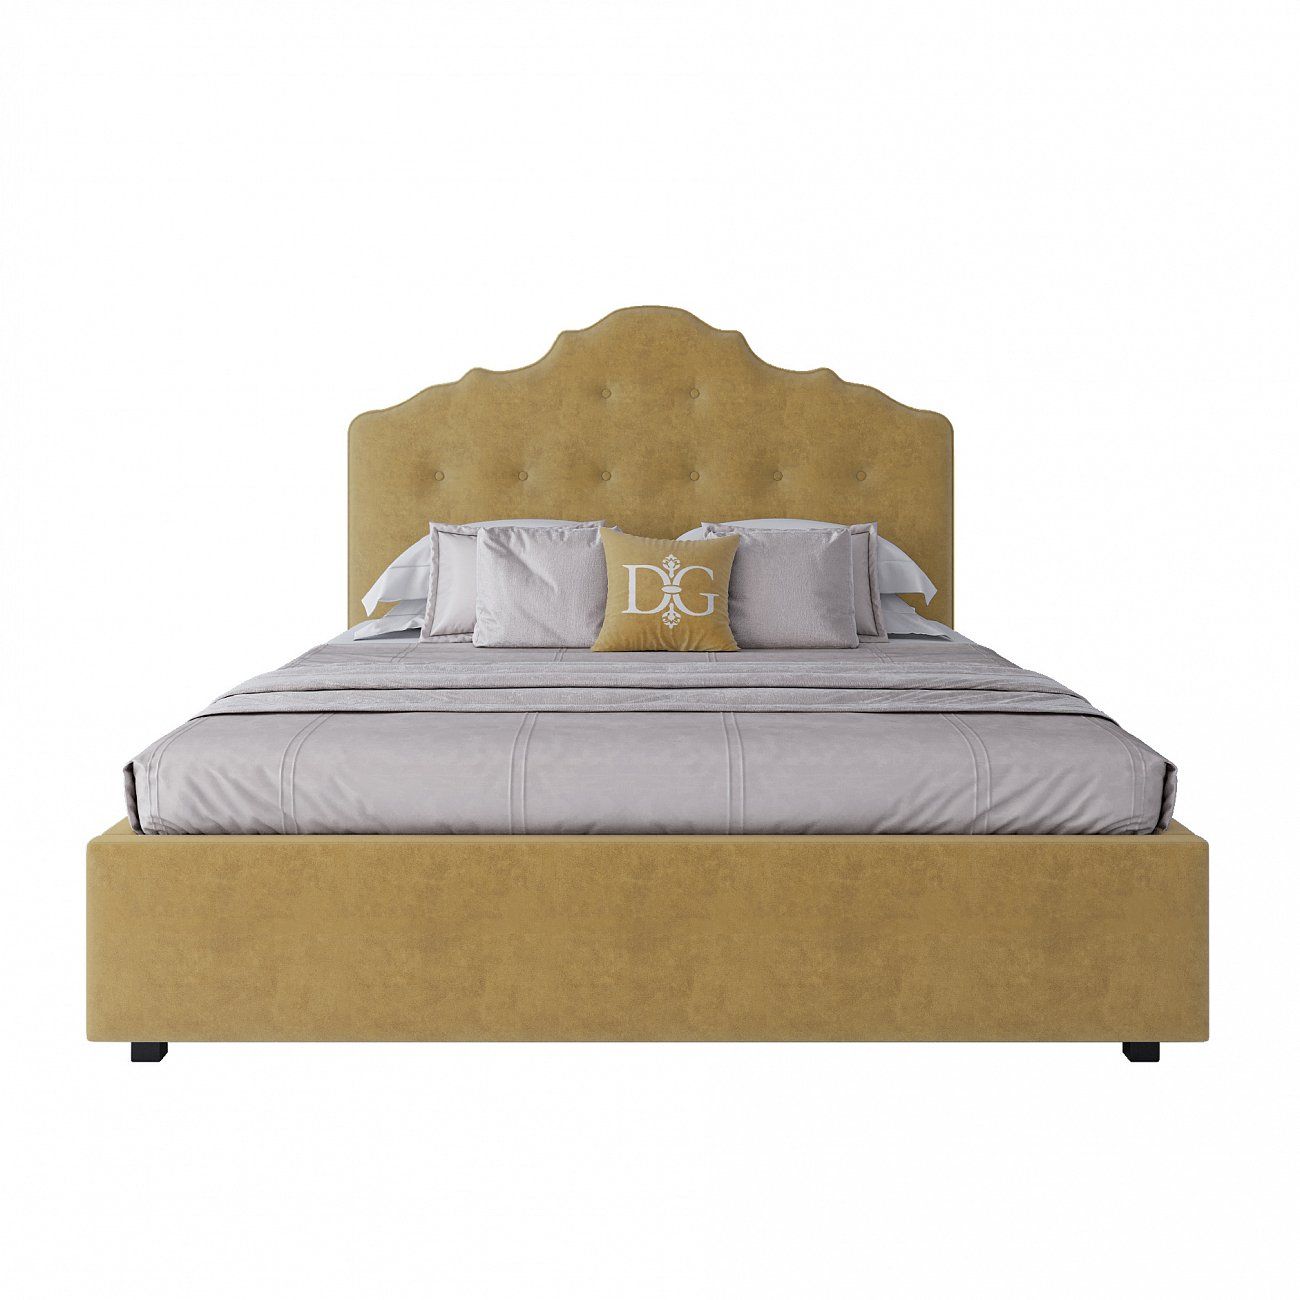 Double bed 160x200 cm yellow Palace